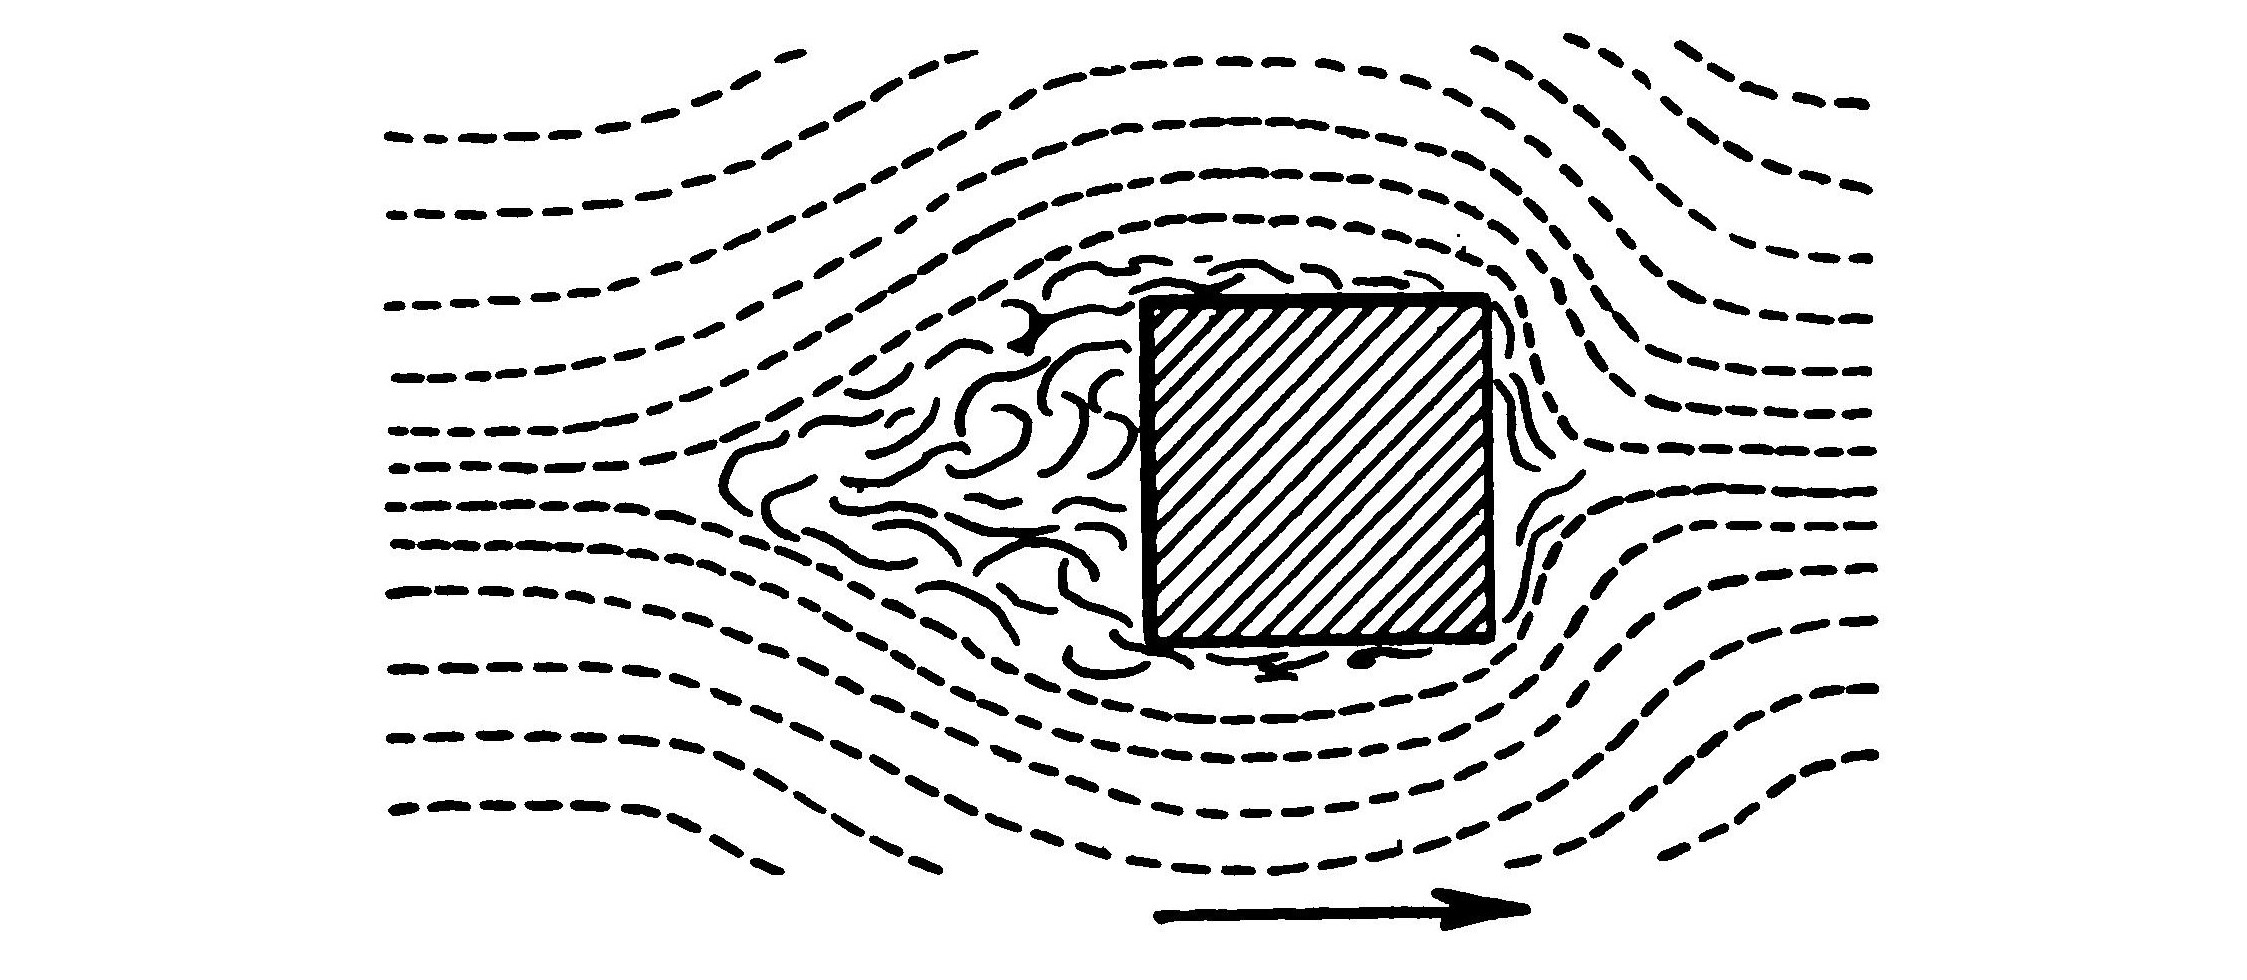 FIG. 5. The disturbance created in the air by a square object.